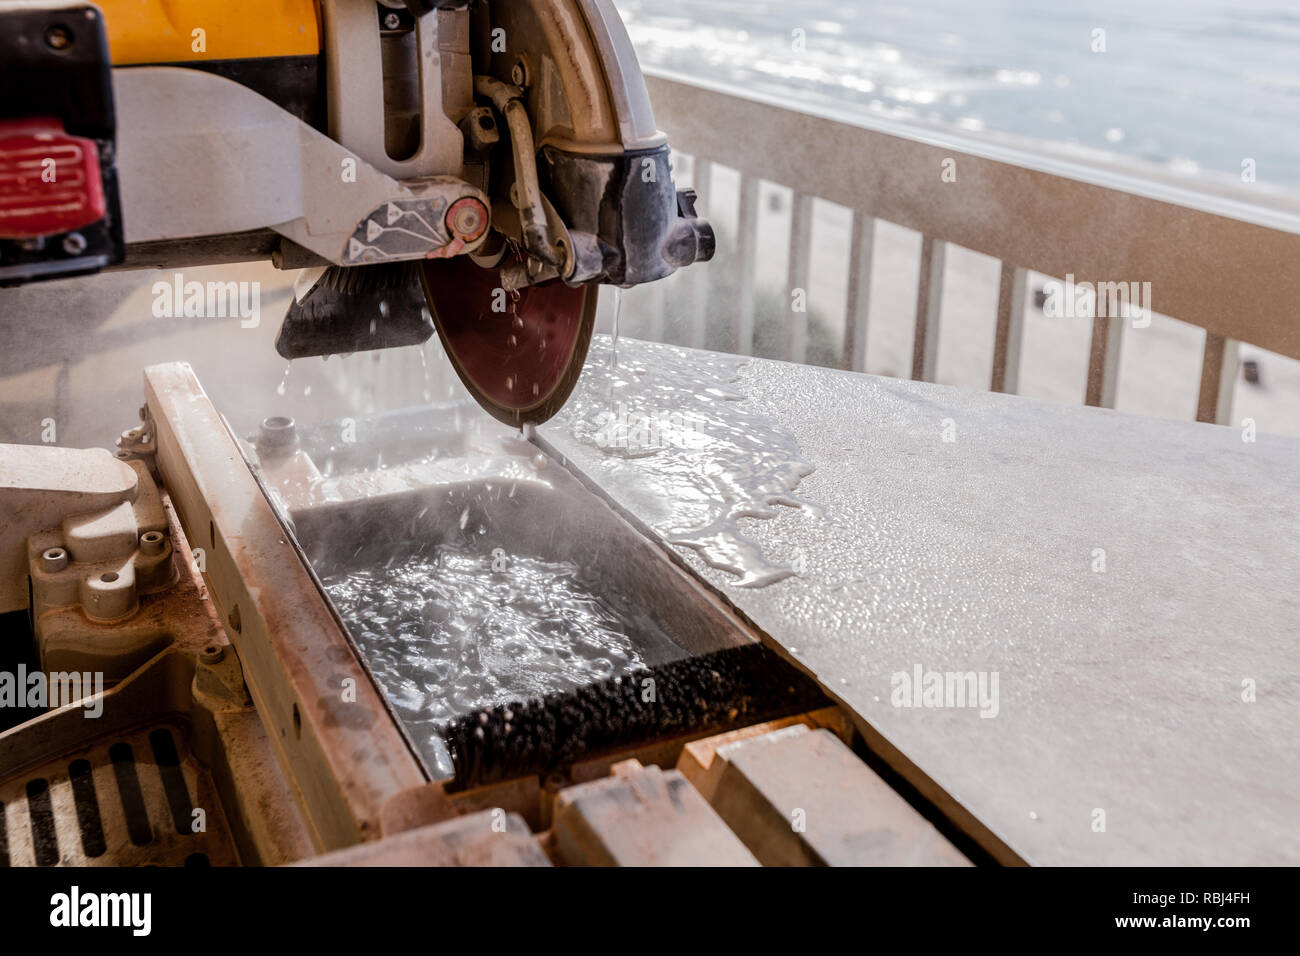 Wet Tile Saw Being Used To Cut Tile Stock Photo